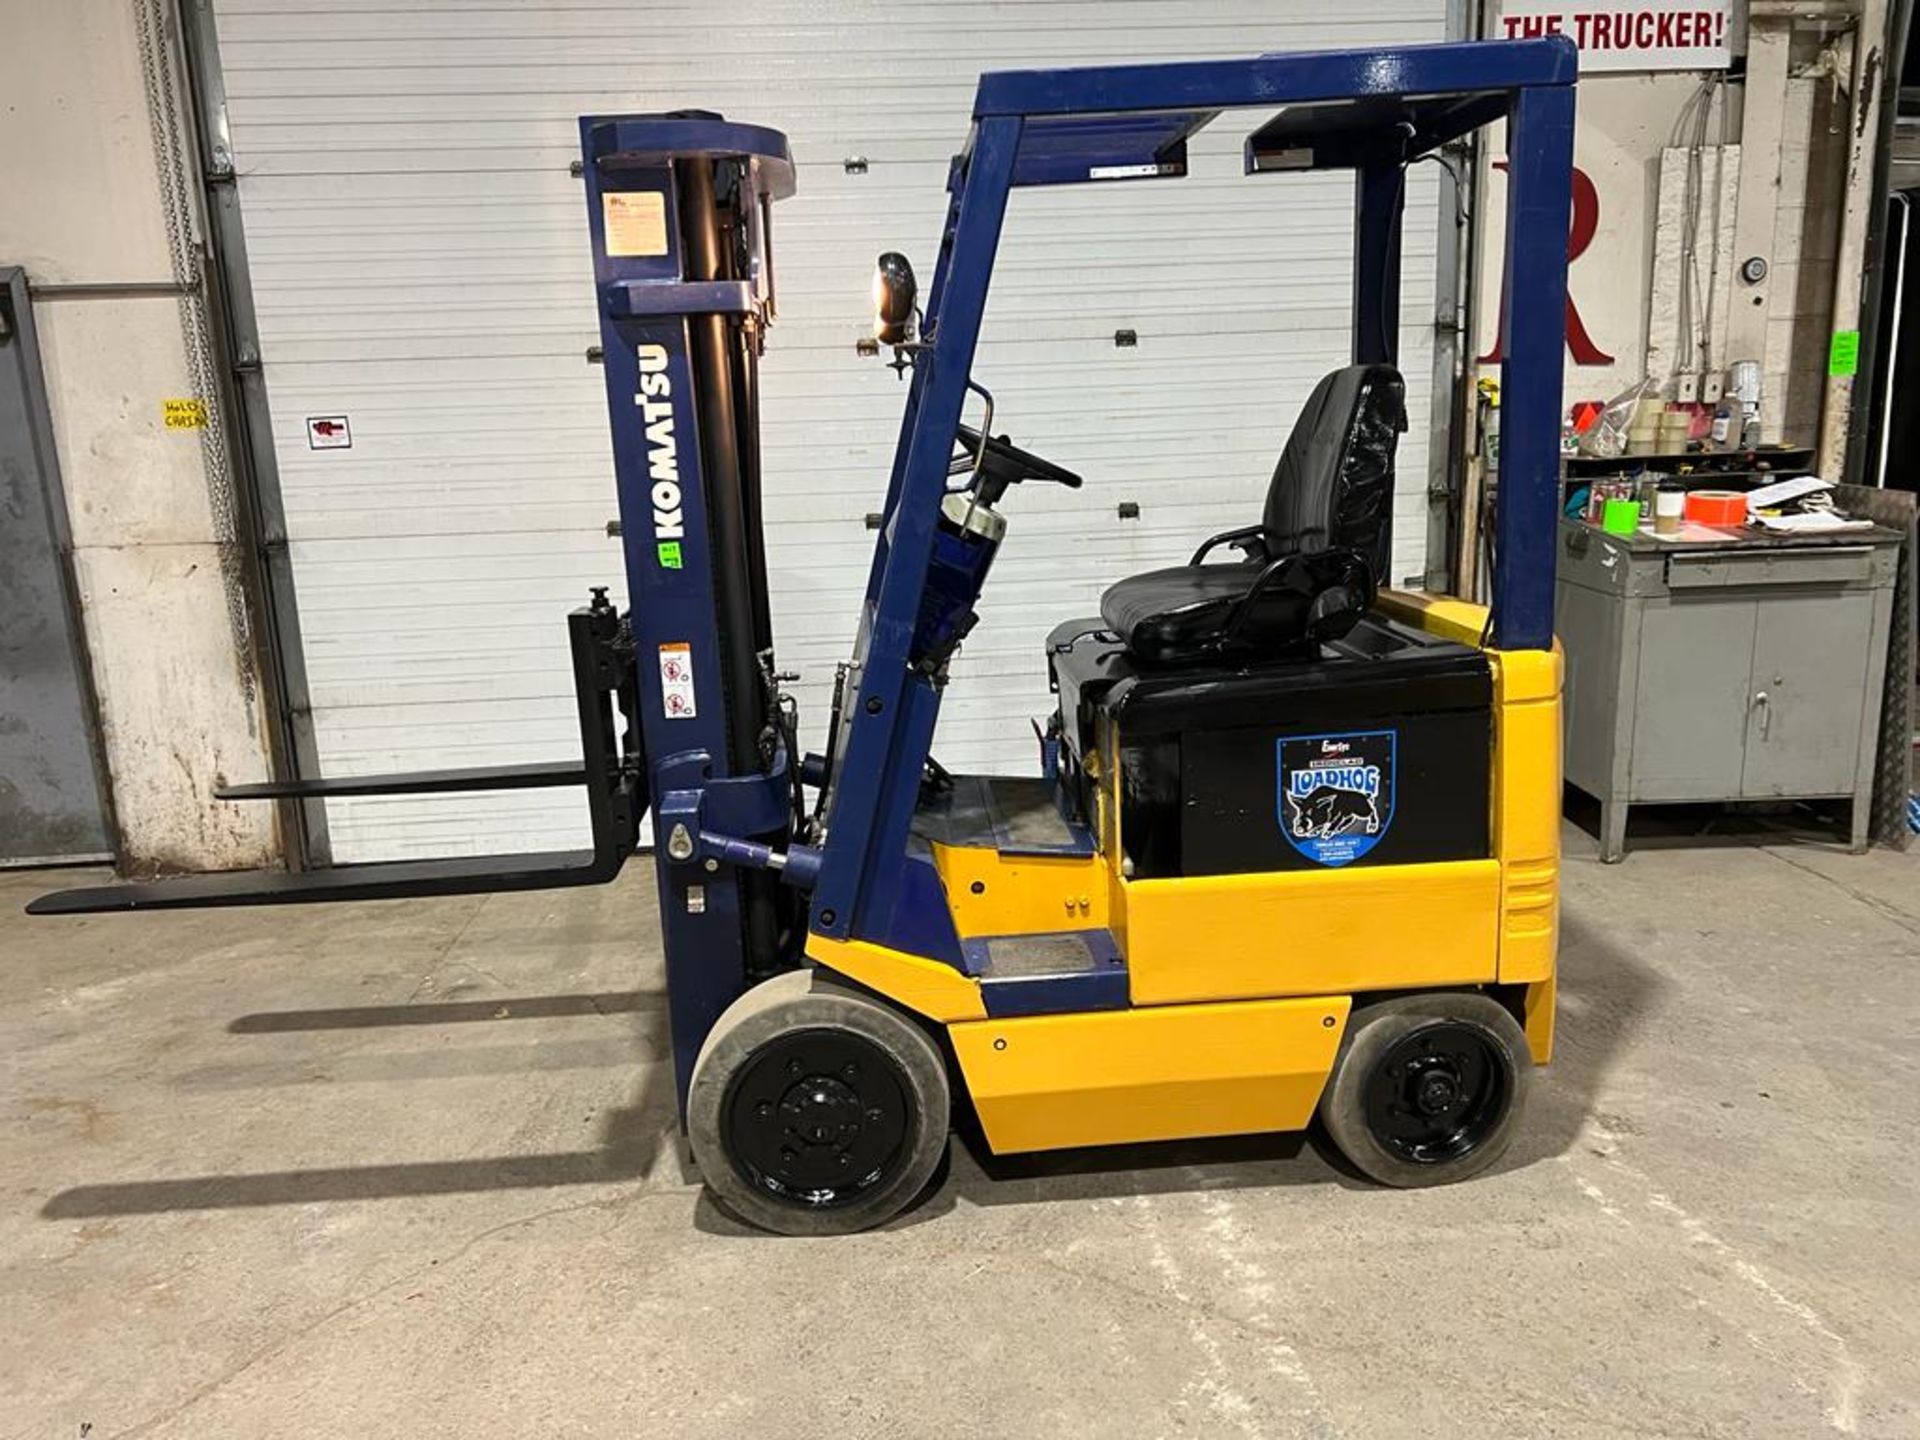 NICE Komatsu 4,000lbs Capacity Forklift with 3-stage mast Electric 36V with LOW HOURS - FREE